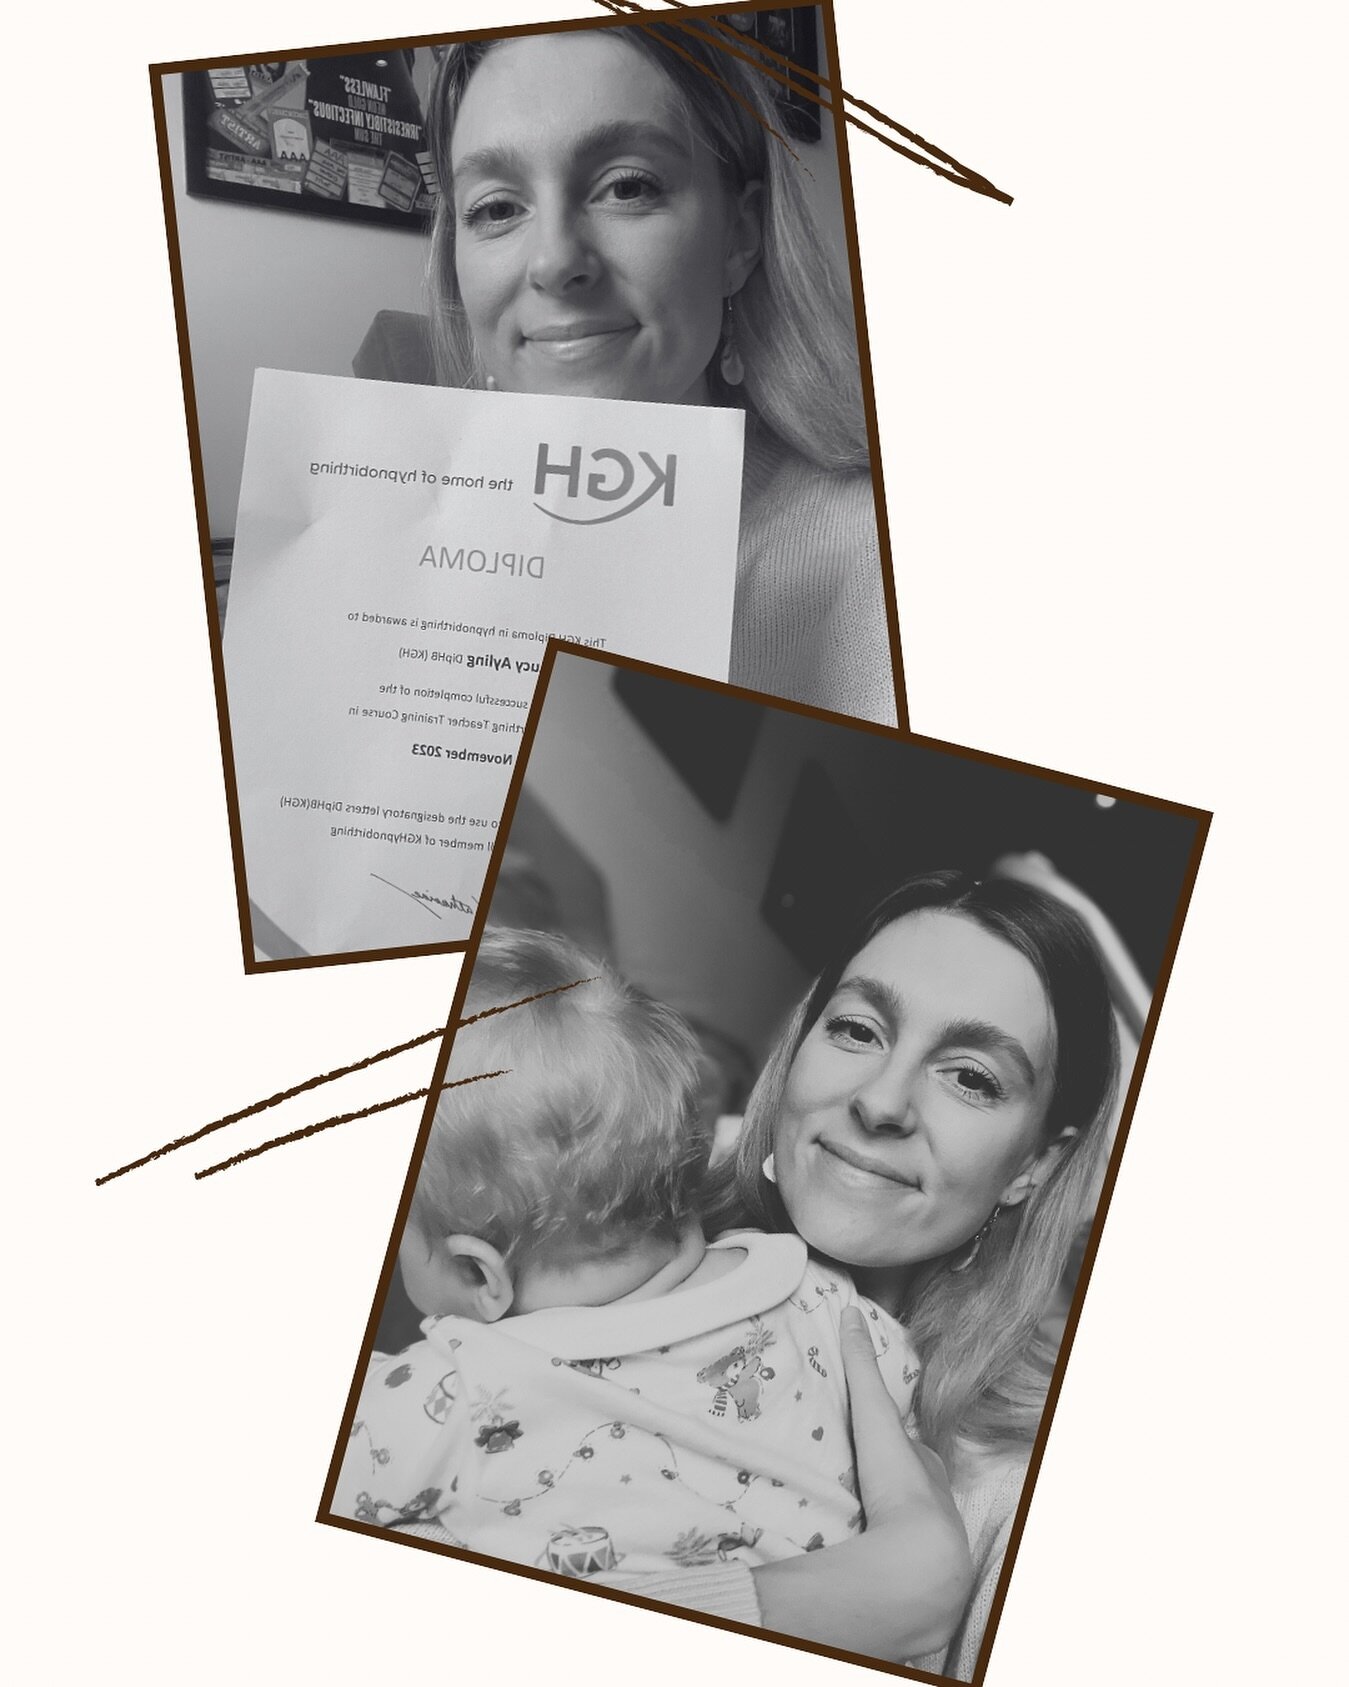 Officially a KG Hypnobirthing Practitioner 🤩 

This weekend I got my diploma through the letter box and it&rsquo;s official&hellip; I&rsquo;m a qualified KG Hypnobirthing Practitioner 🌸

Watch this space for more details on classes, teaching and mo